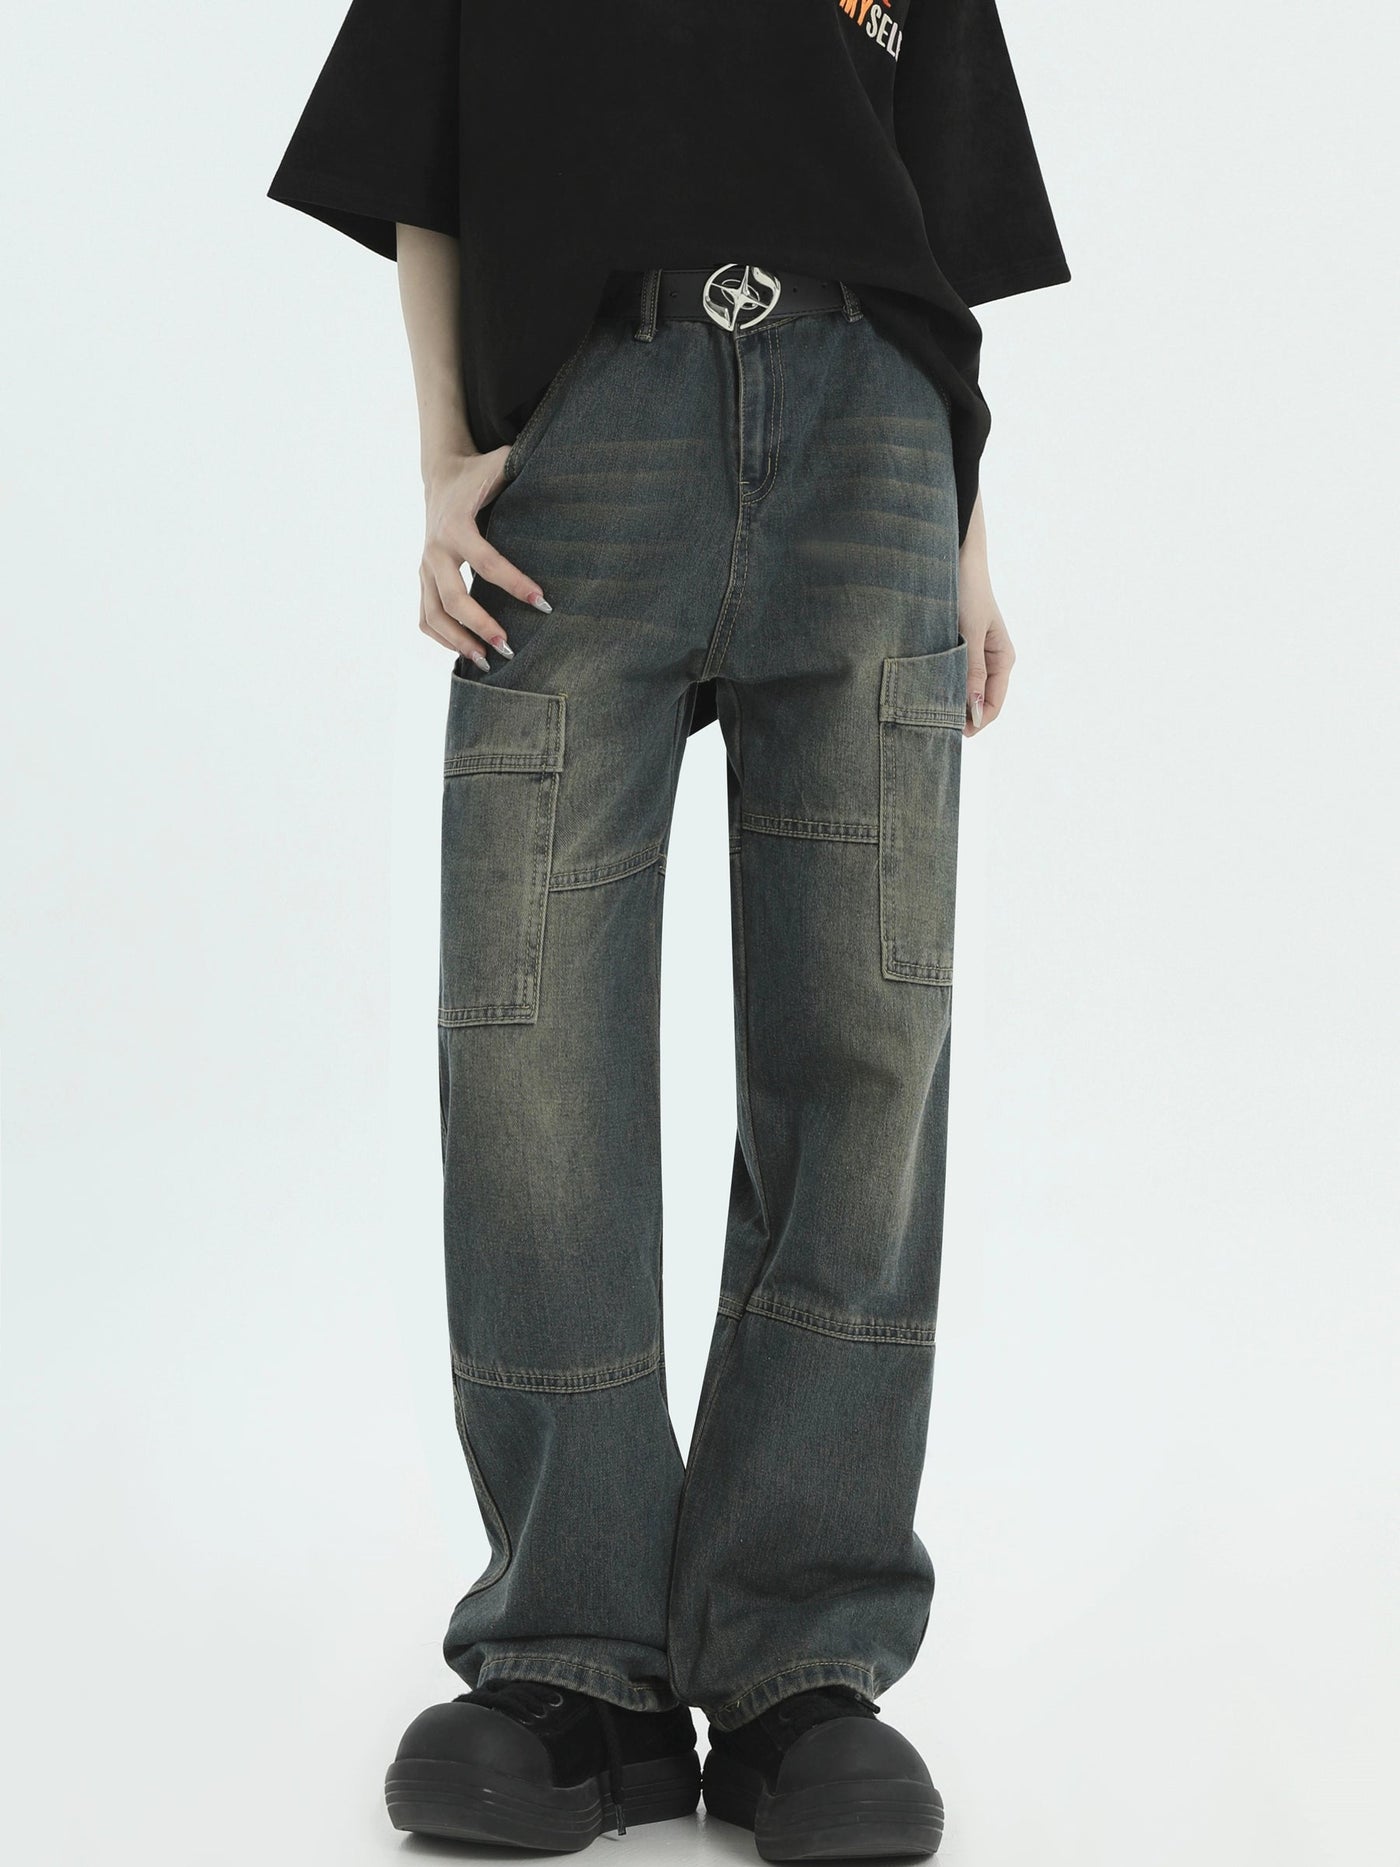 Washed and Whiskers Bootcut Jeans Korean Street Fashion Jeans By INS Korea Shop Online at OH Vault